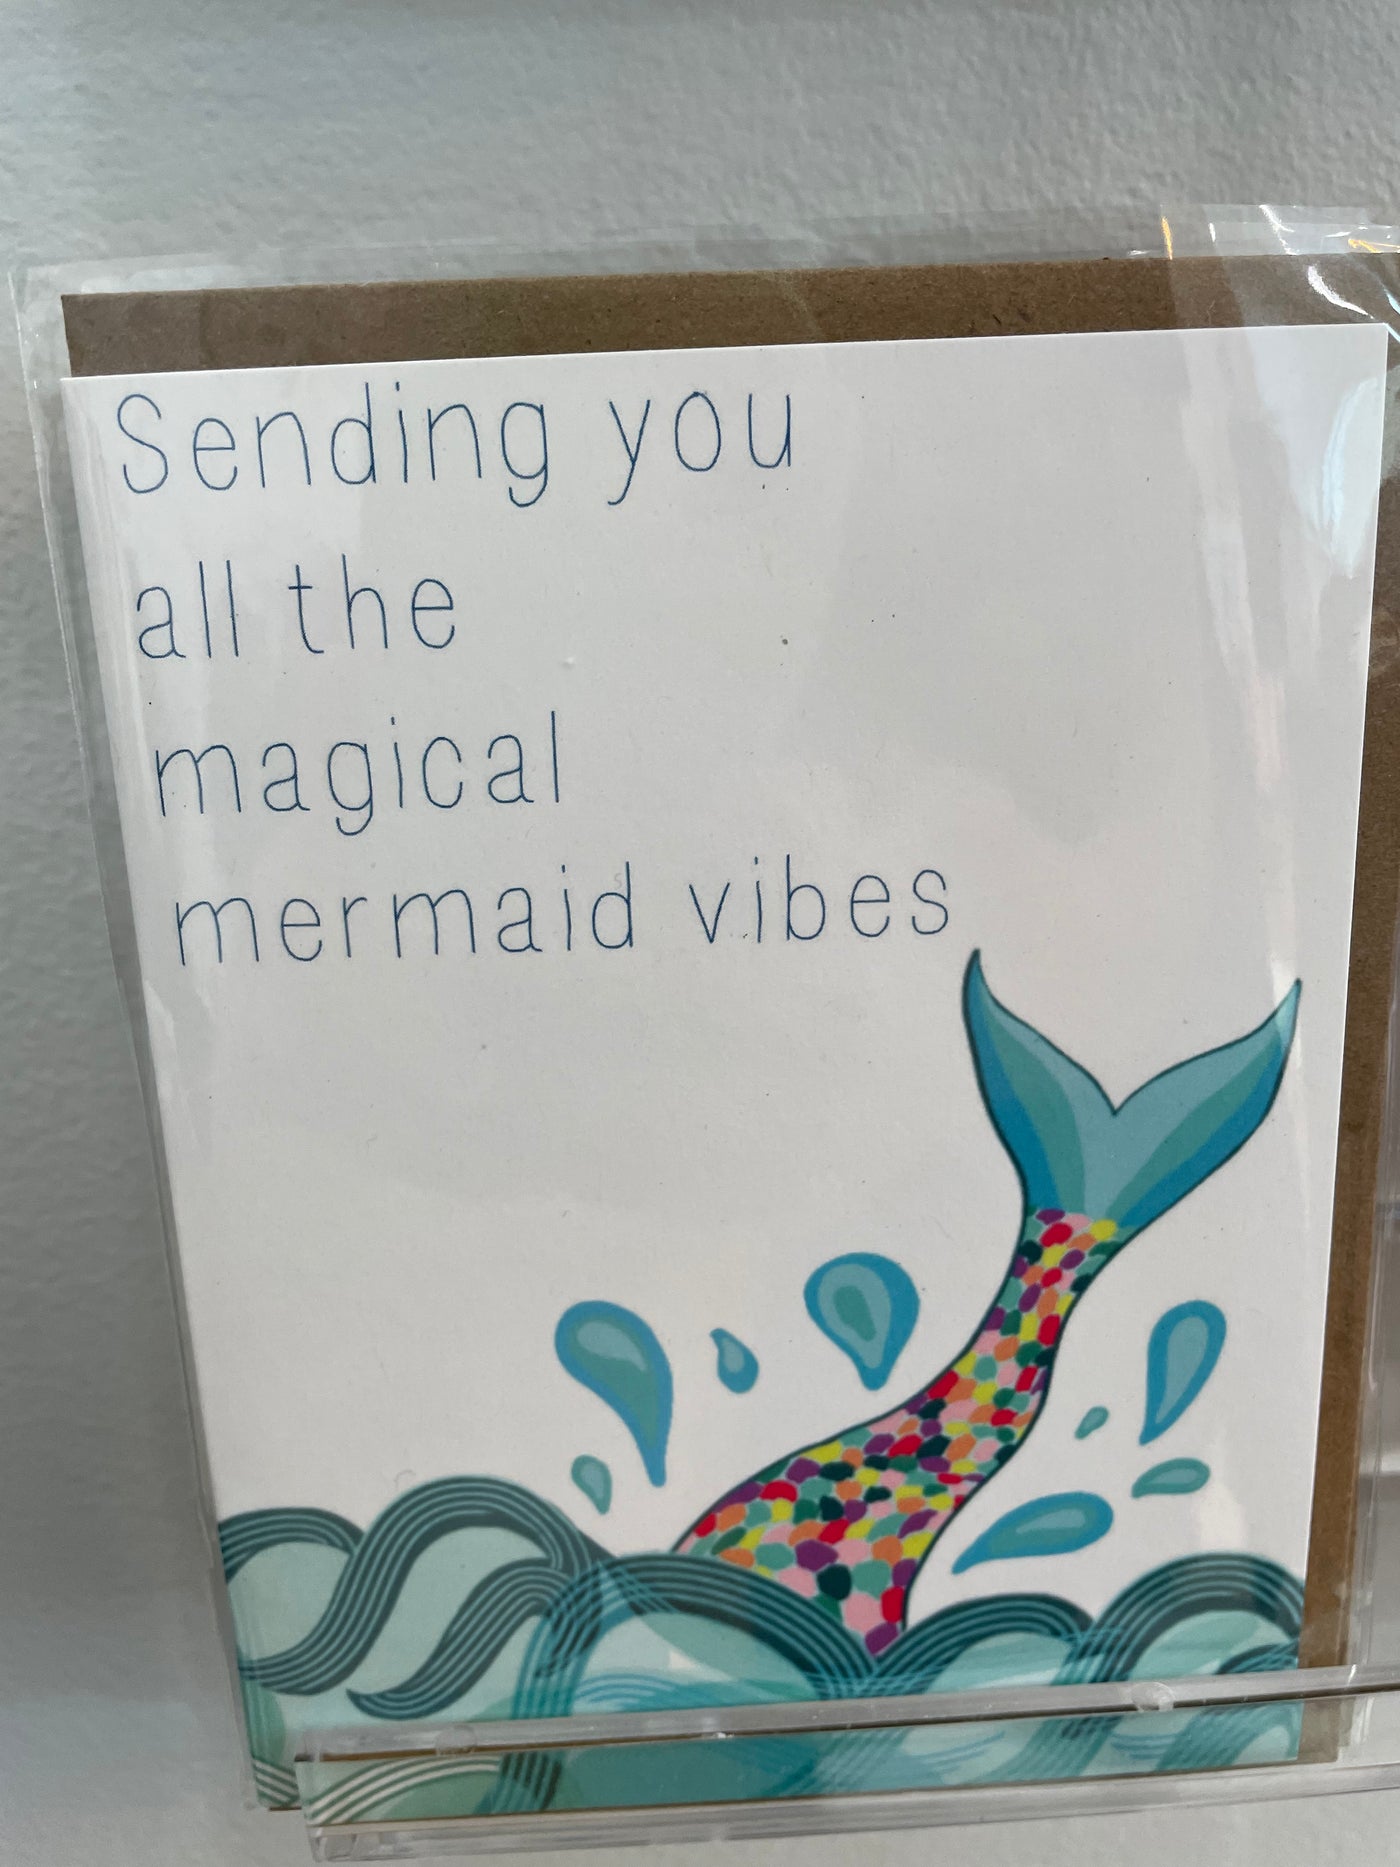 Sending magical mermaid vibes card for a friend woman owned business made.